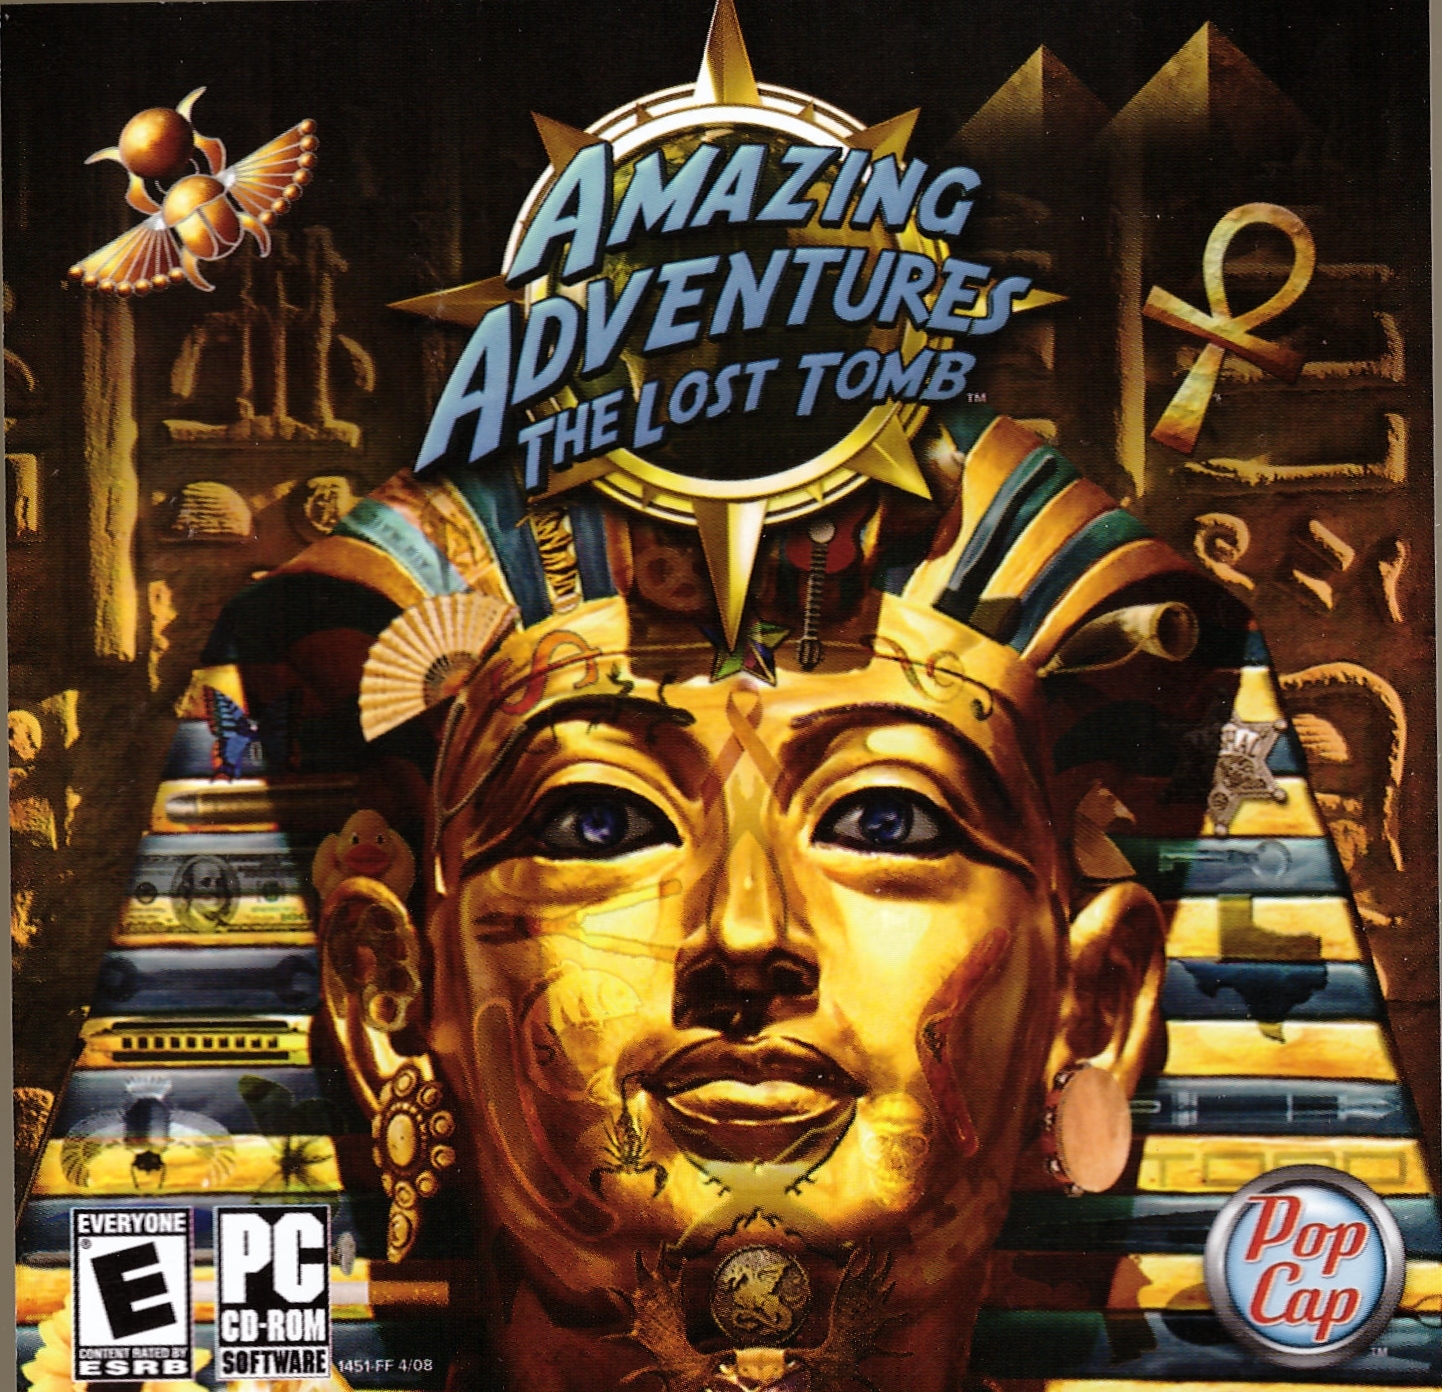 Primary image for Amazing Adventures The Lost Tomb Pop Cap CD ROM PC Video Game